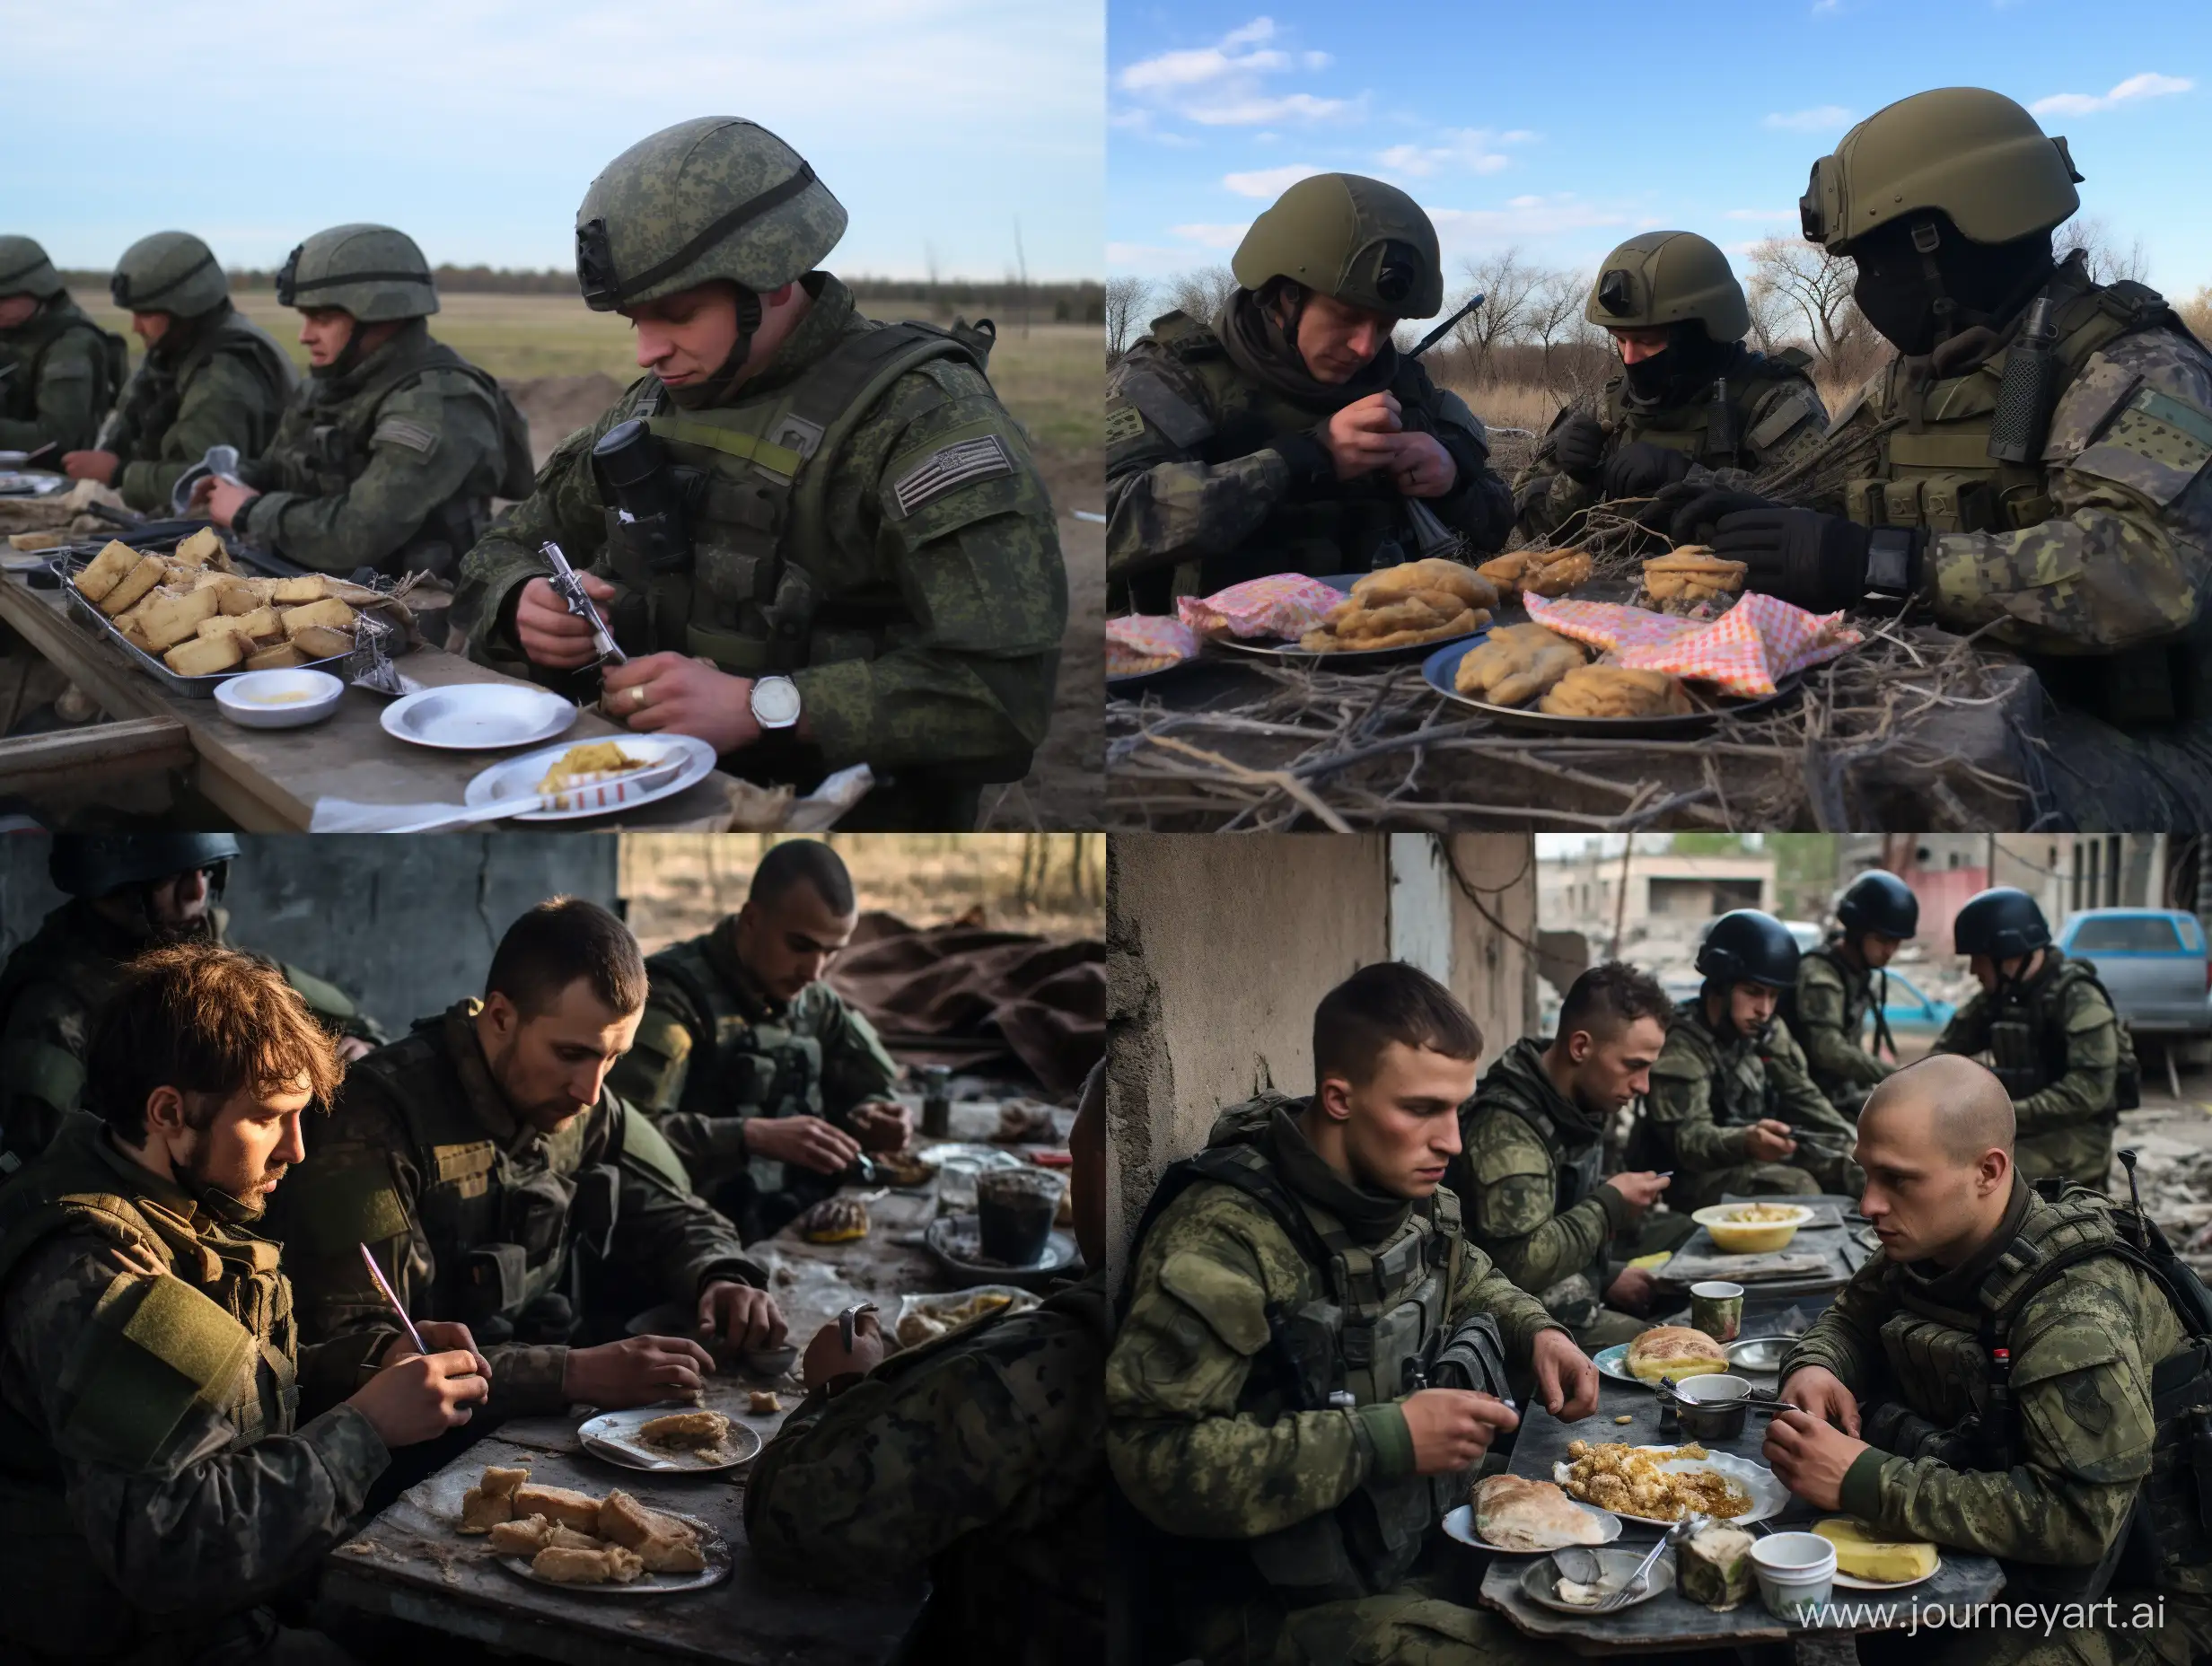 Ukrainian-Soldiers-Sharing-a-Battle-Meal-in-Donbass-City